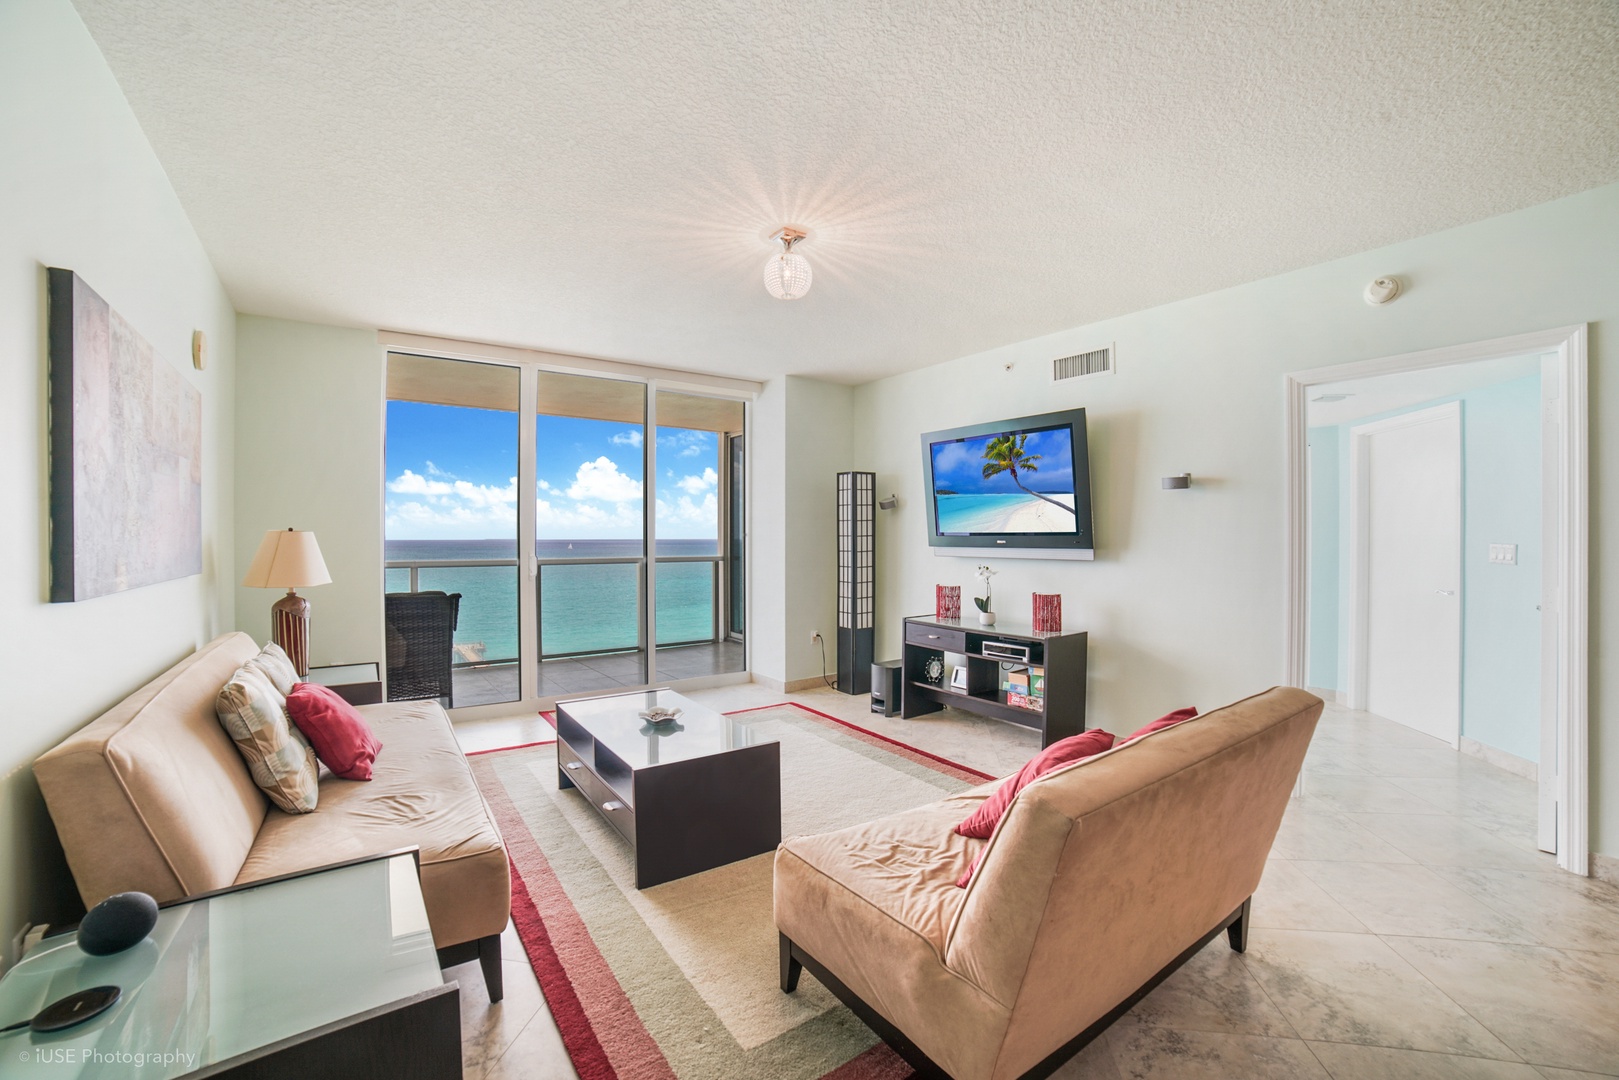 Living area with stunning views, ample seating, and TV